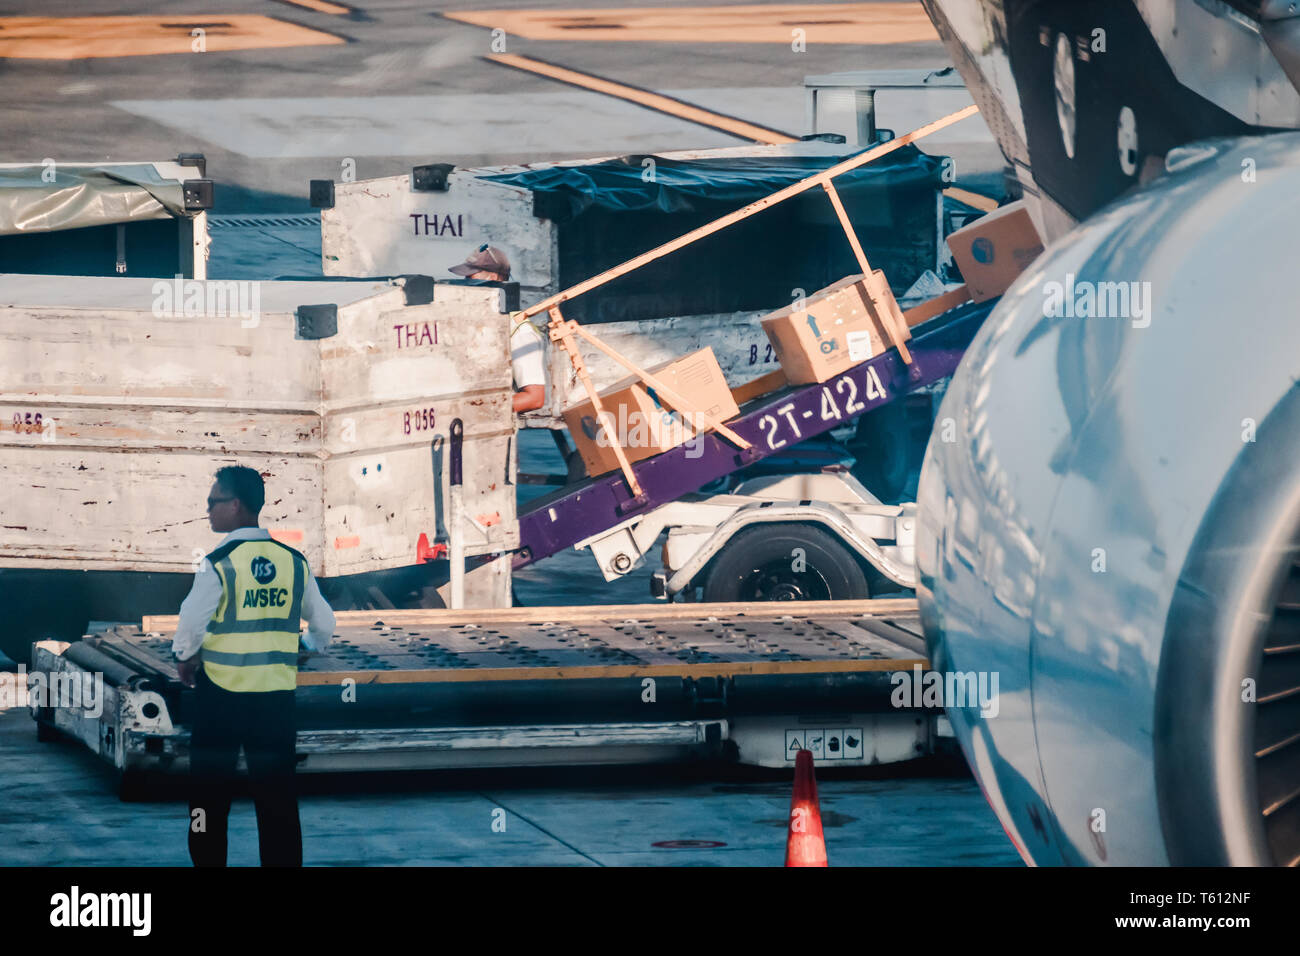 Asian ground crew loading cargo, mail, and luggage including cardboard box into back cargo bay at the airport Stock Photo